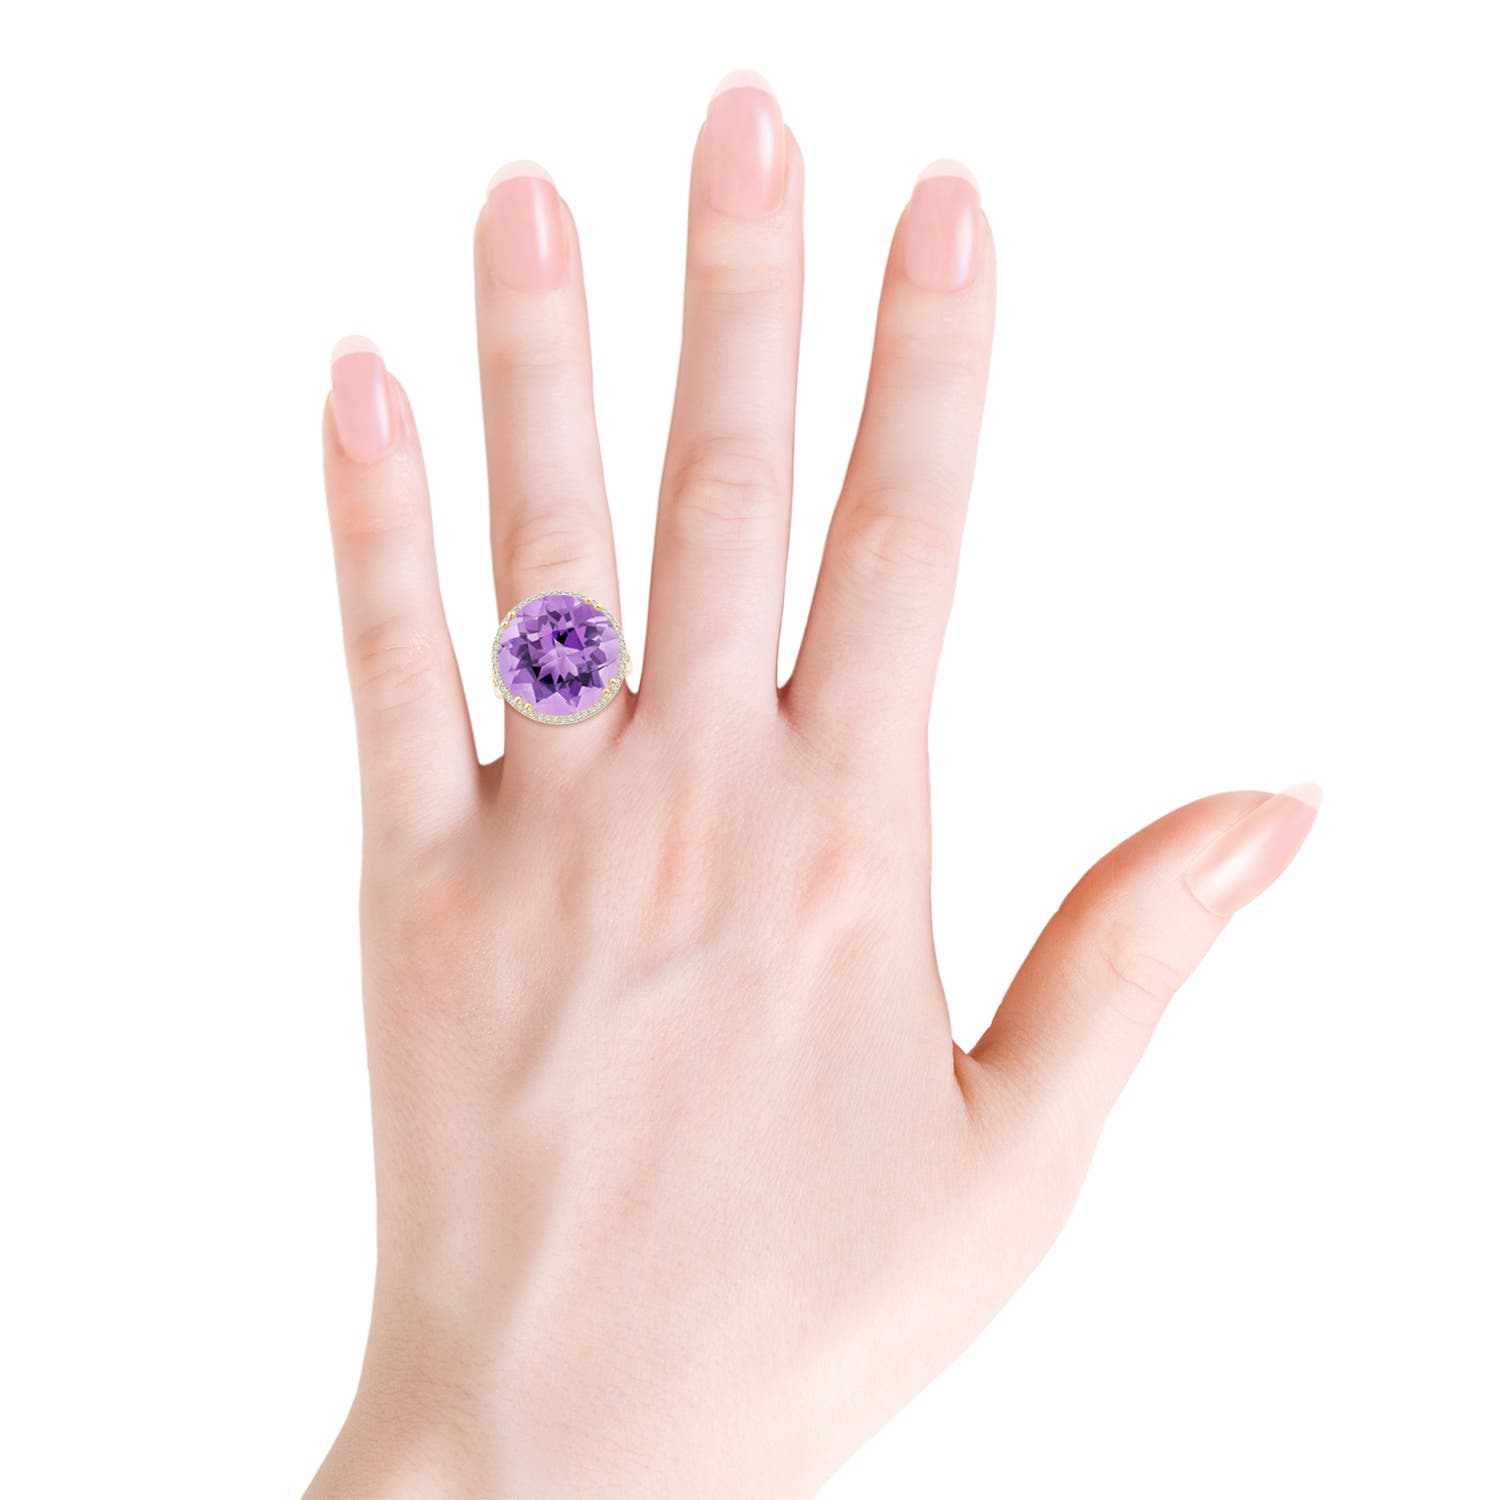 A - Amethyst / 15.18 CT / 14 KT Yellow Gold